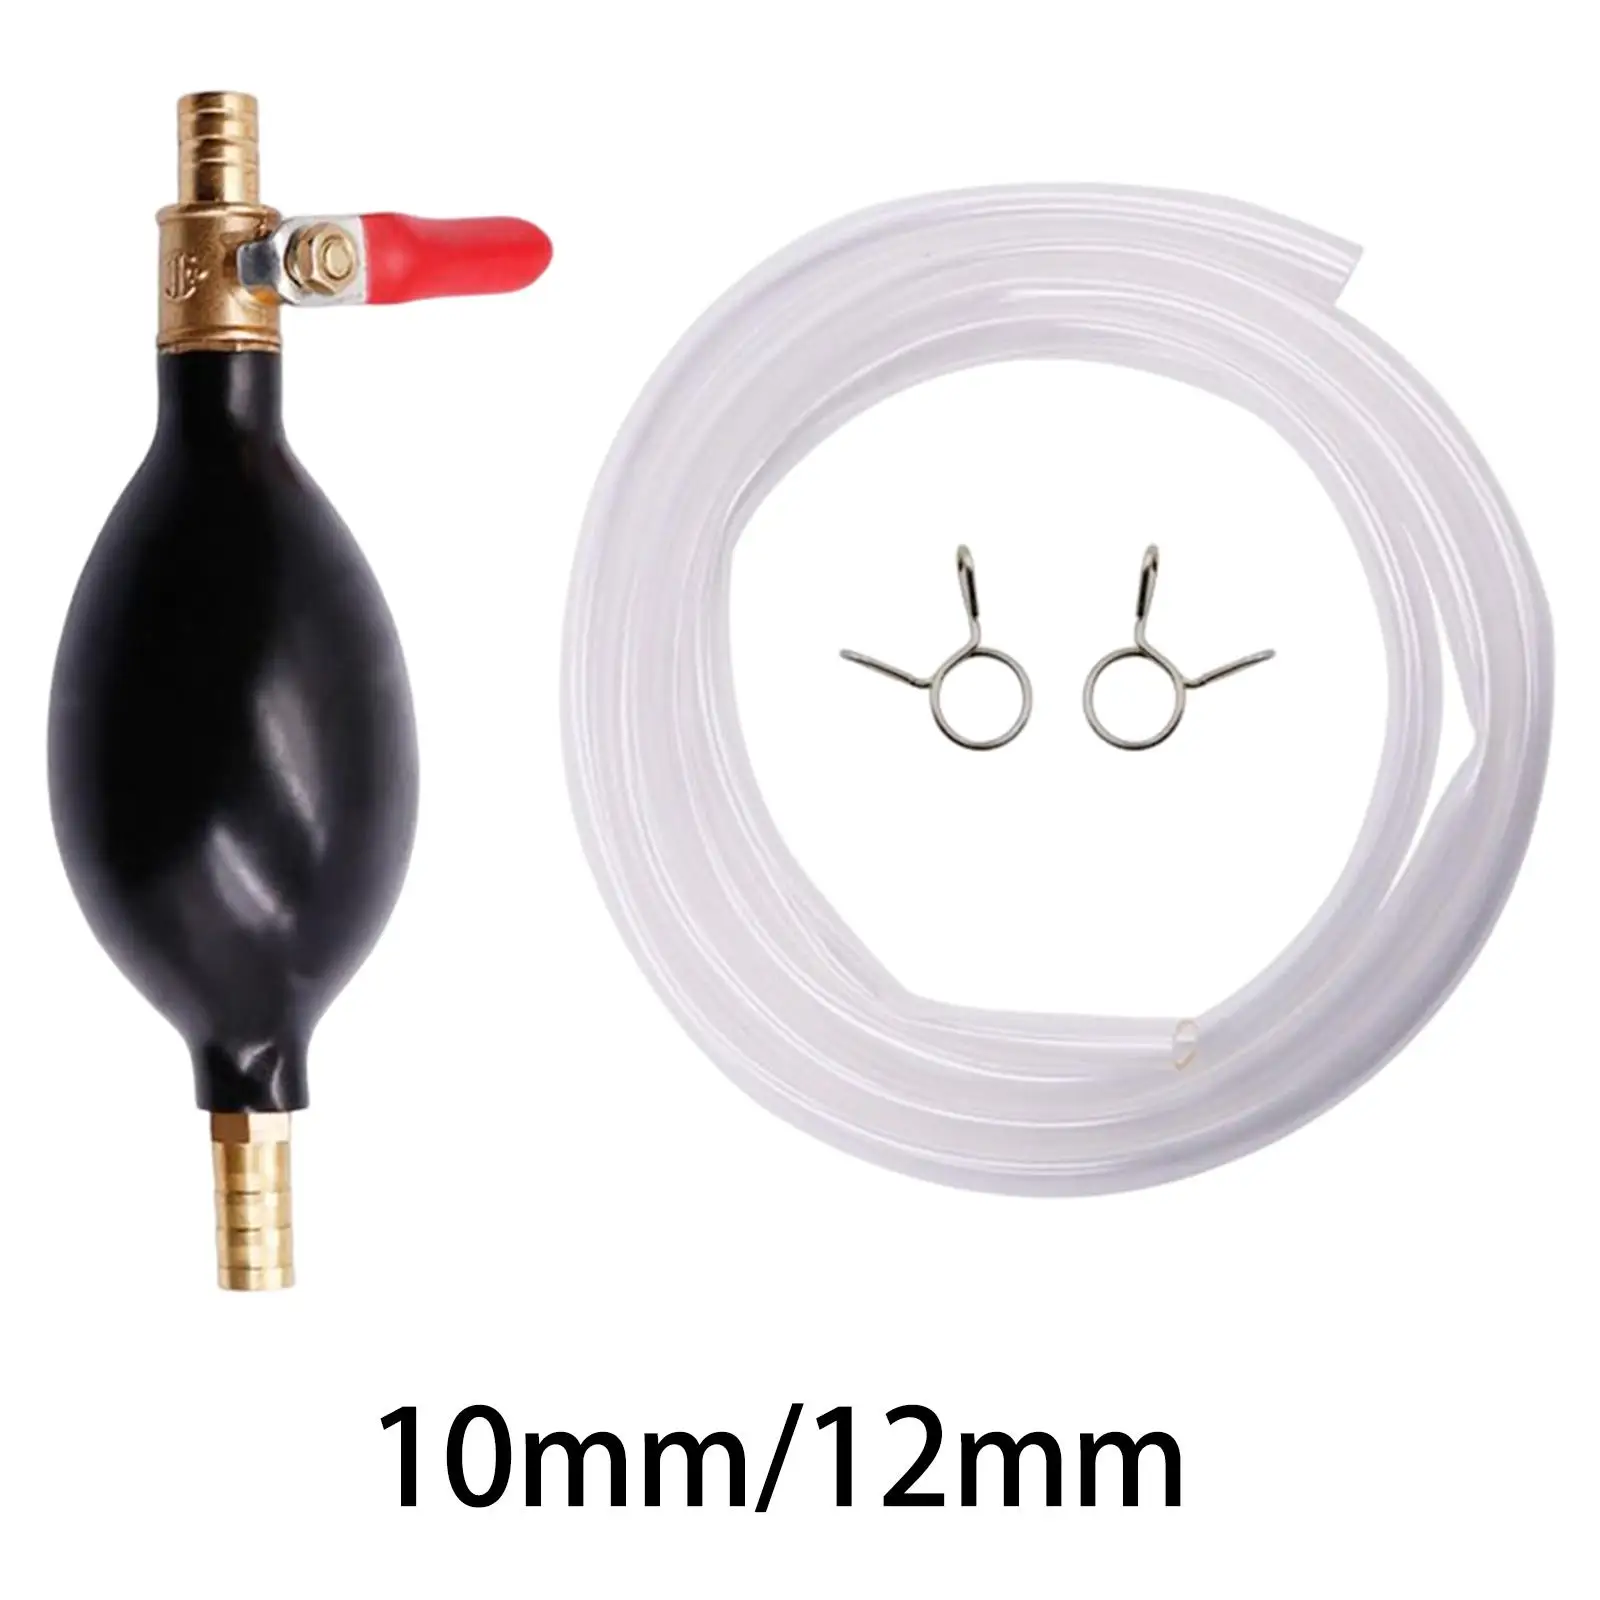 Manual Siphon Pump with Hose Clip Control for Oil Liquid